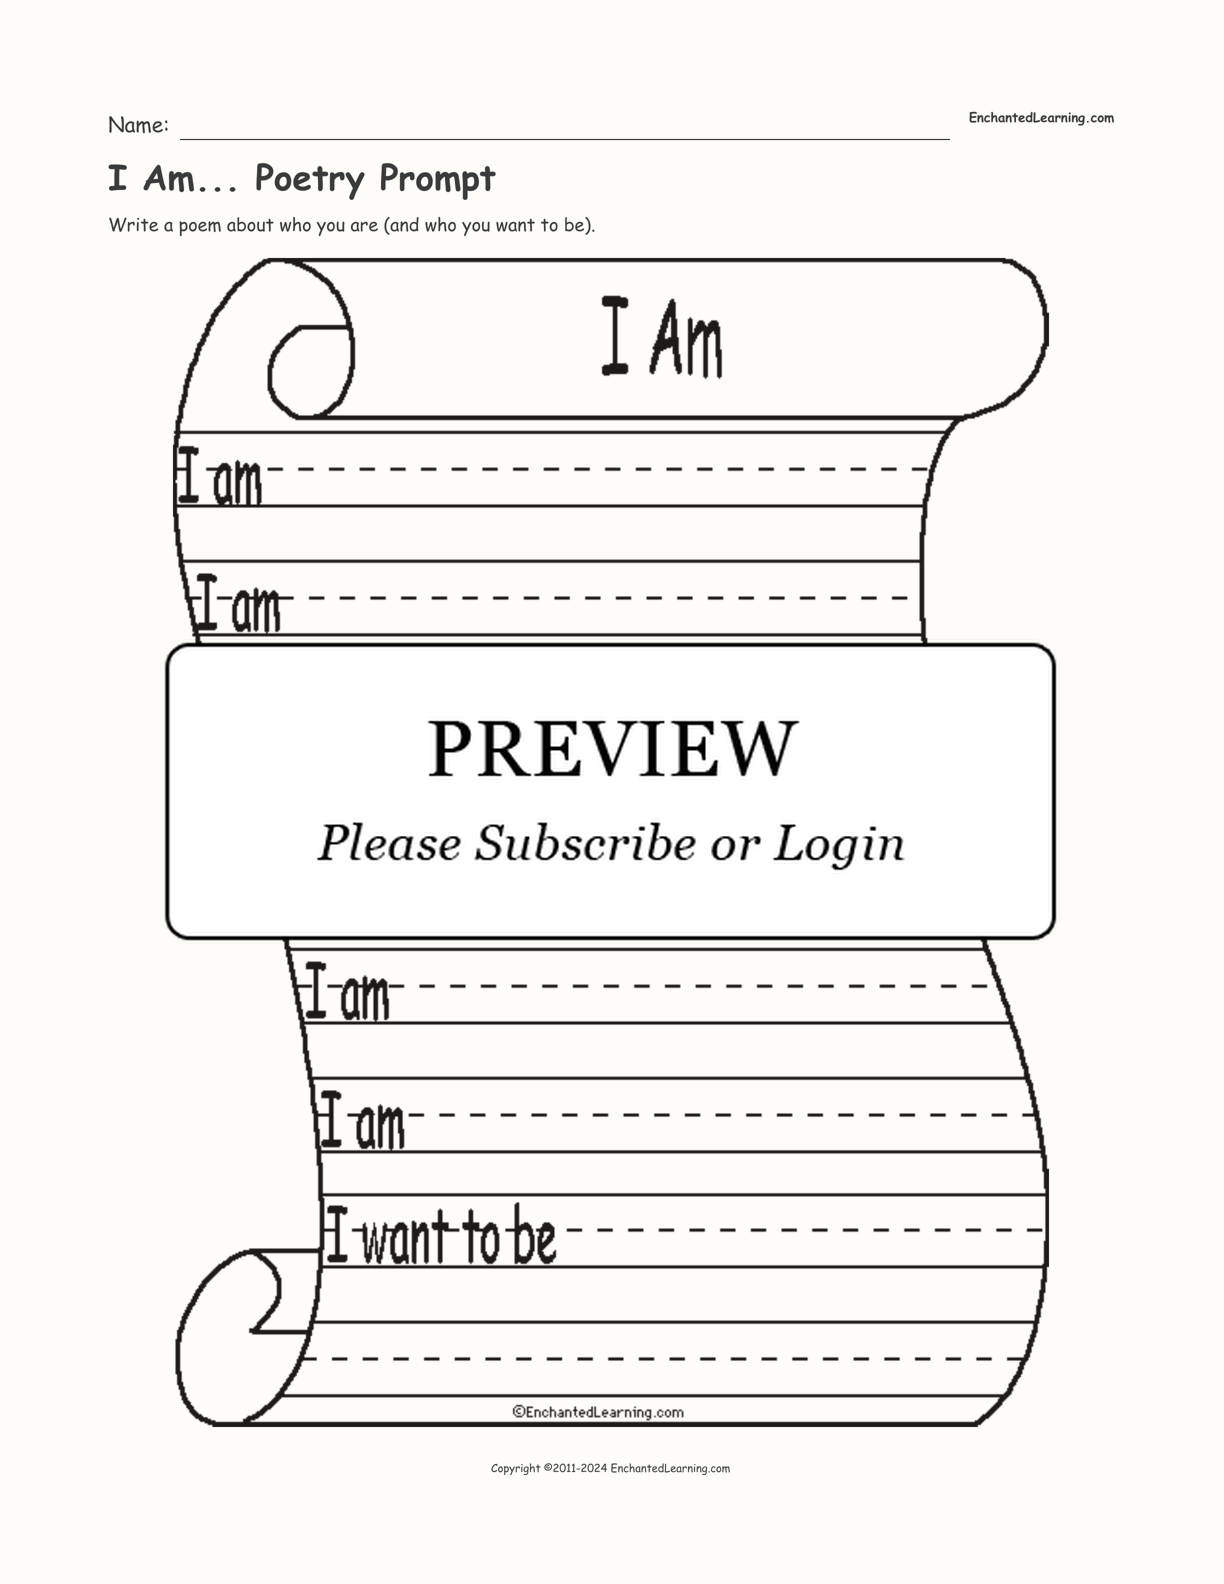 I Am... Poetry Prompt interactive worksheet page 1